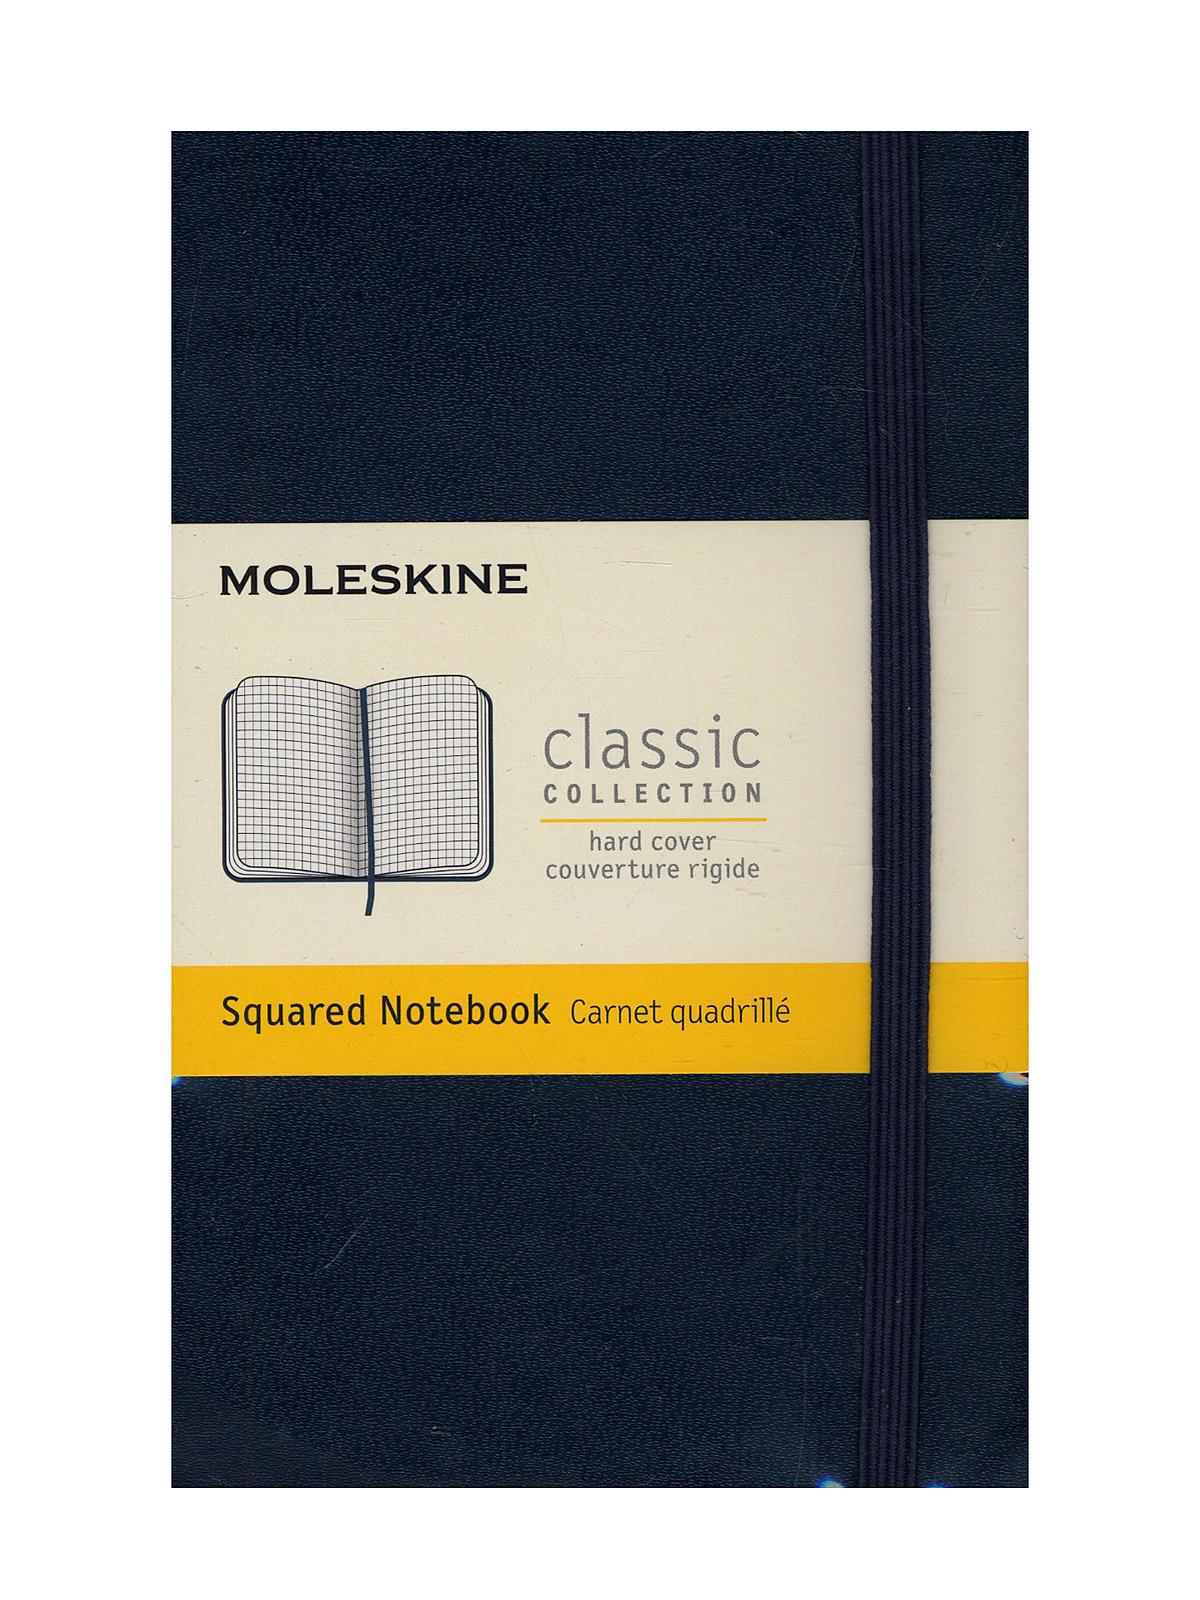 Classic Hard Cover Notebooks Sapphire Blue 3 1 2 In. X 5 1 2 In. 192 Pages, Squared